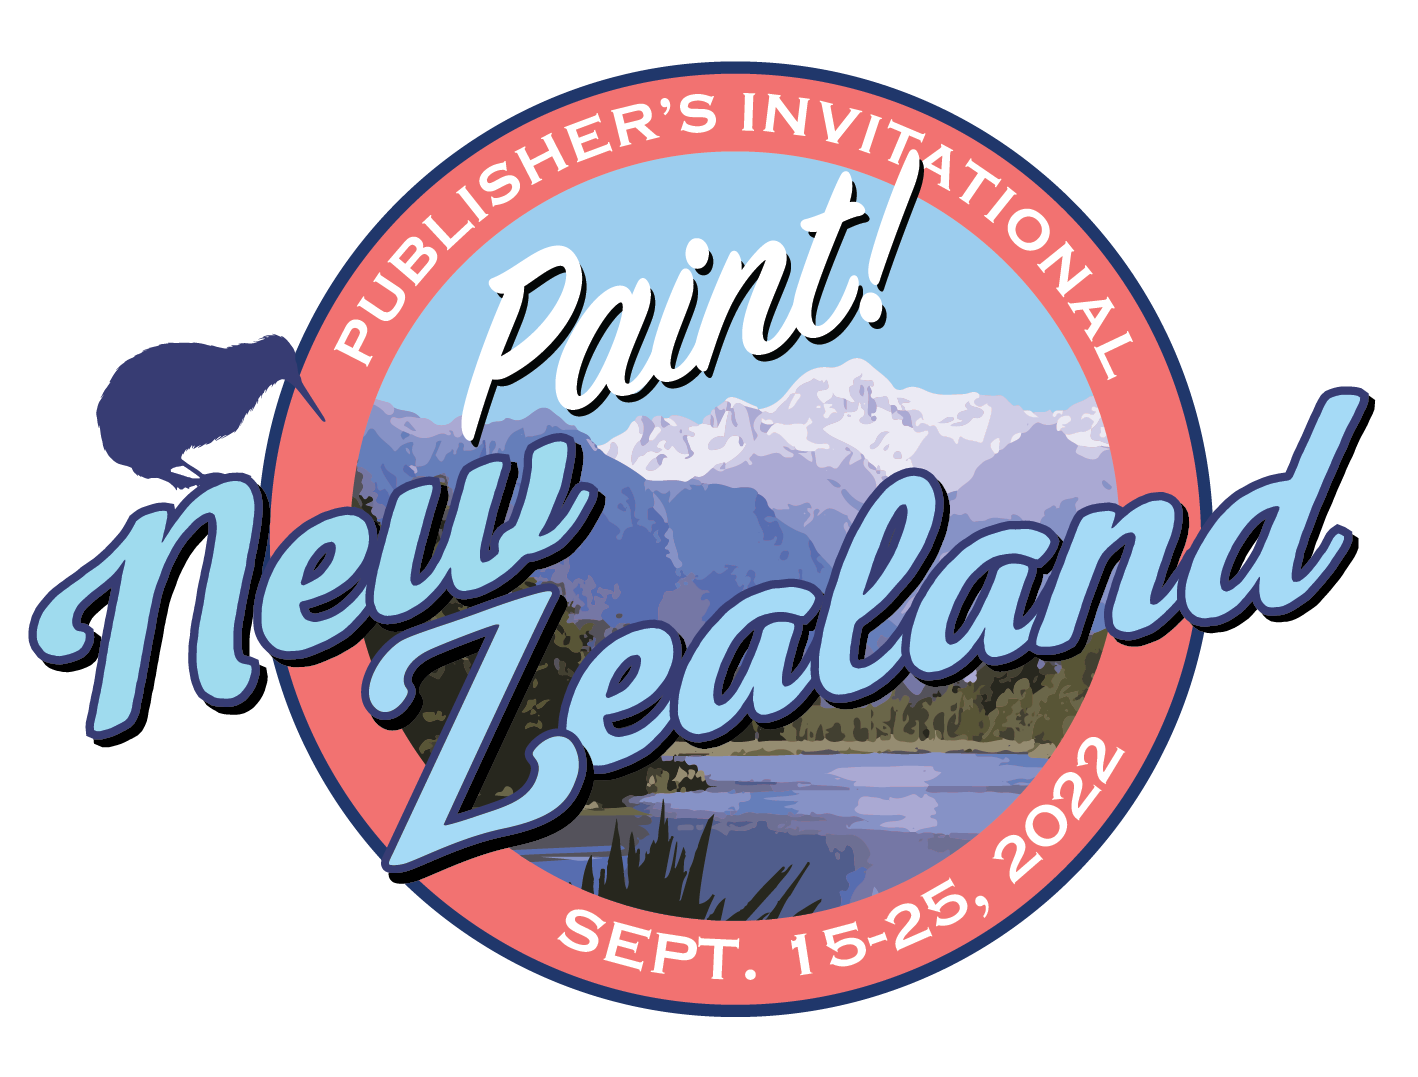 2022 Paint New Zealand - Shared Room Registration